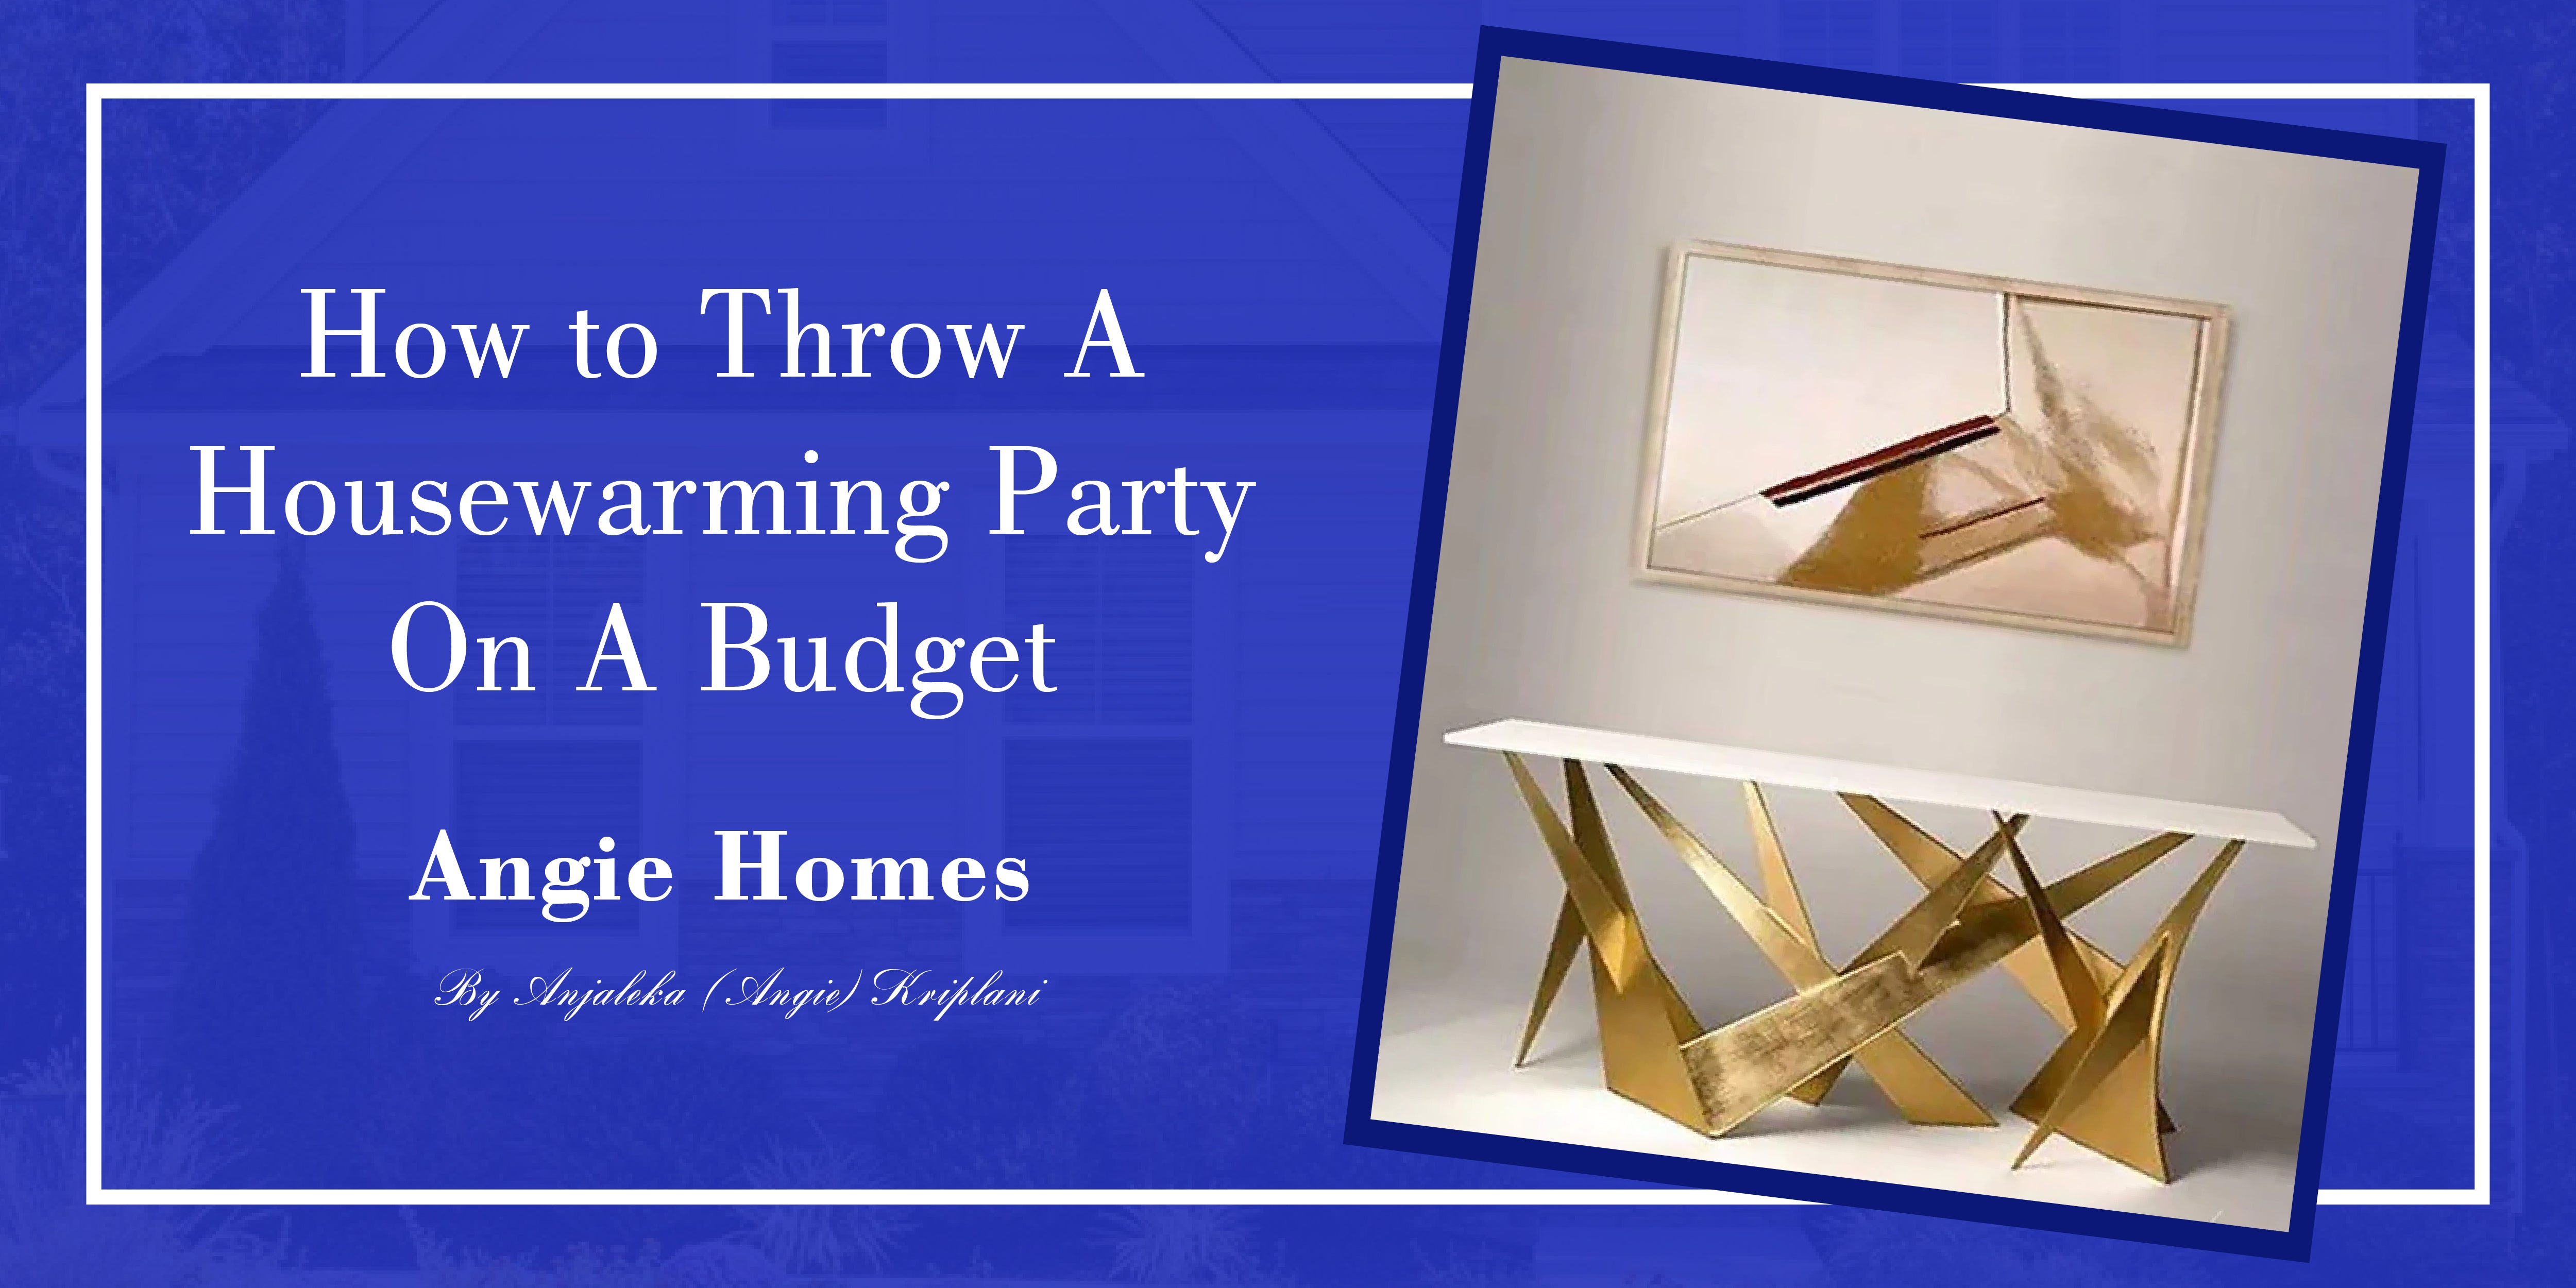 How to Throw a Housewarming Party on a Budget